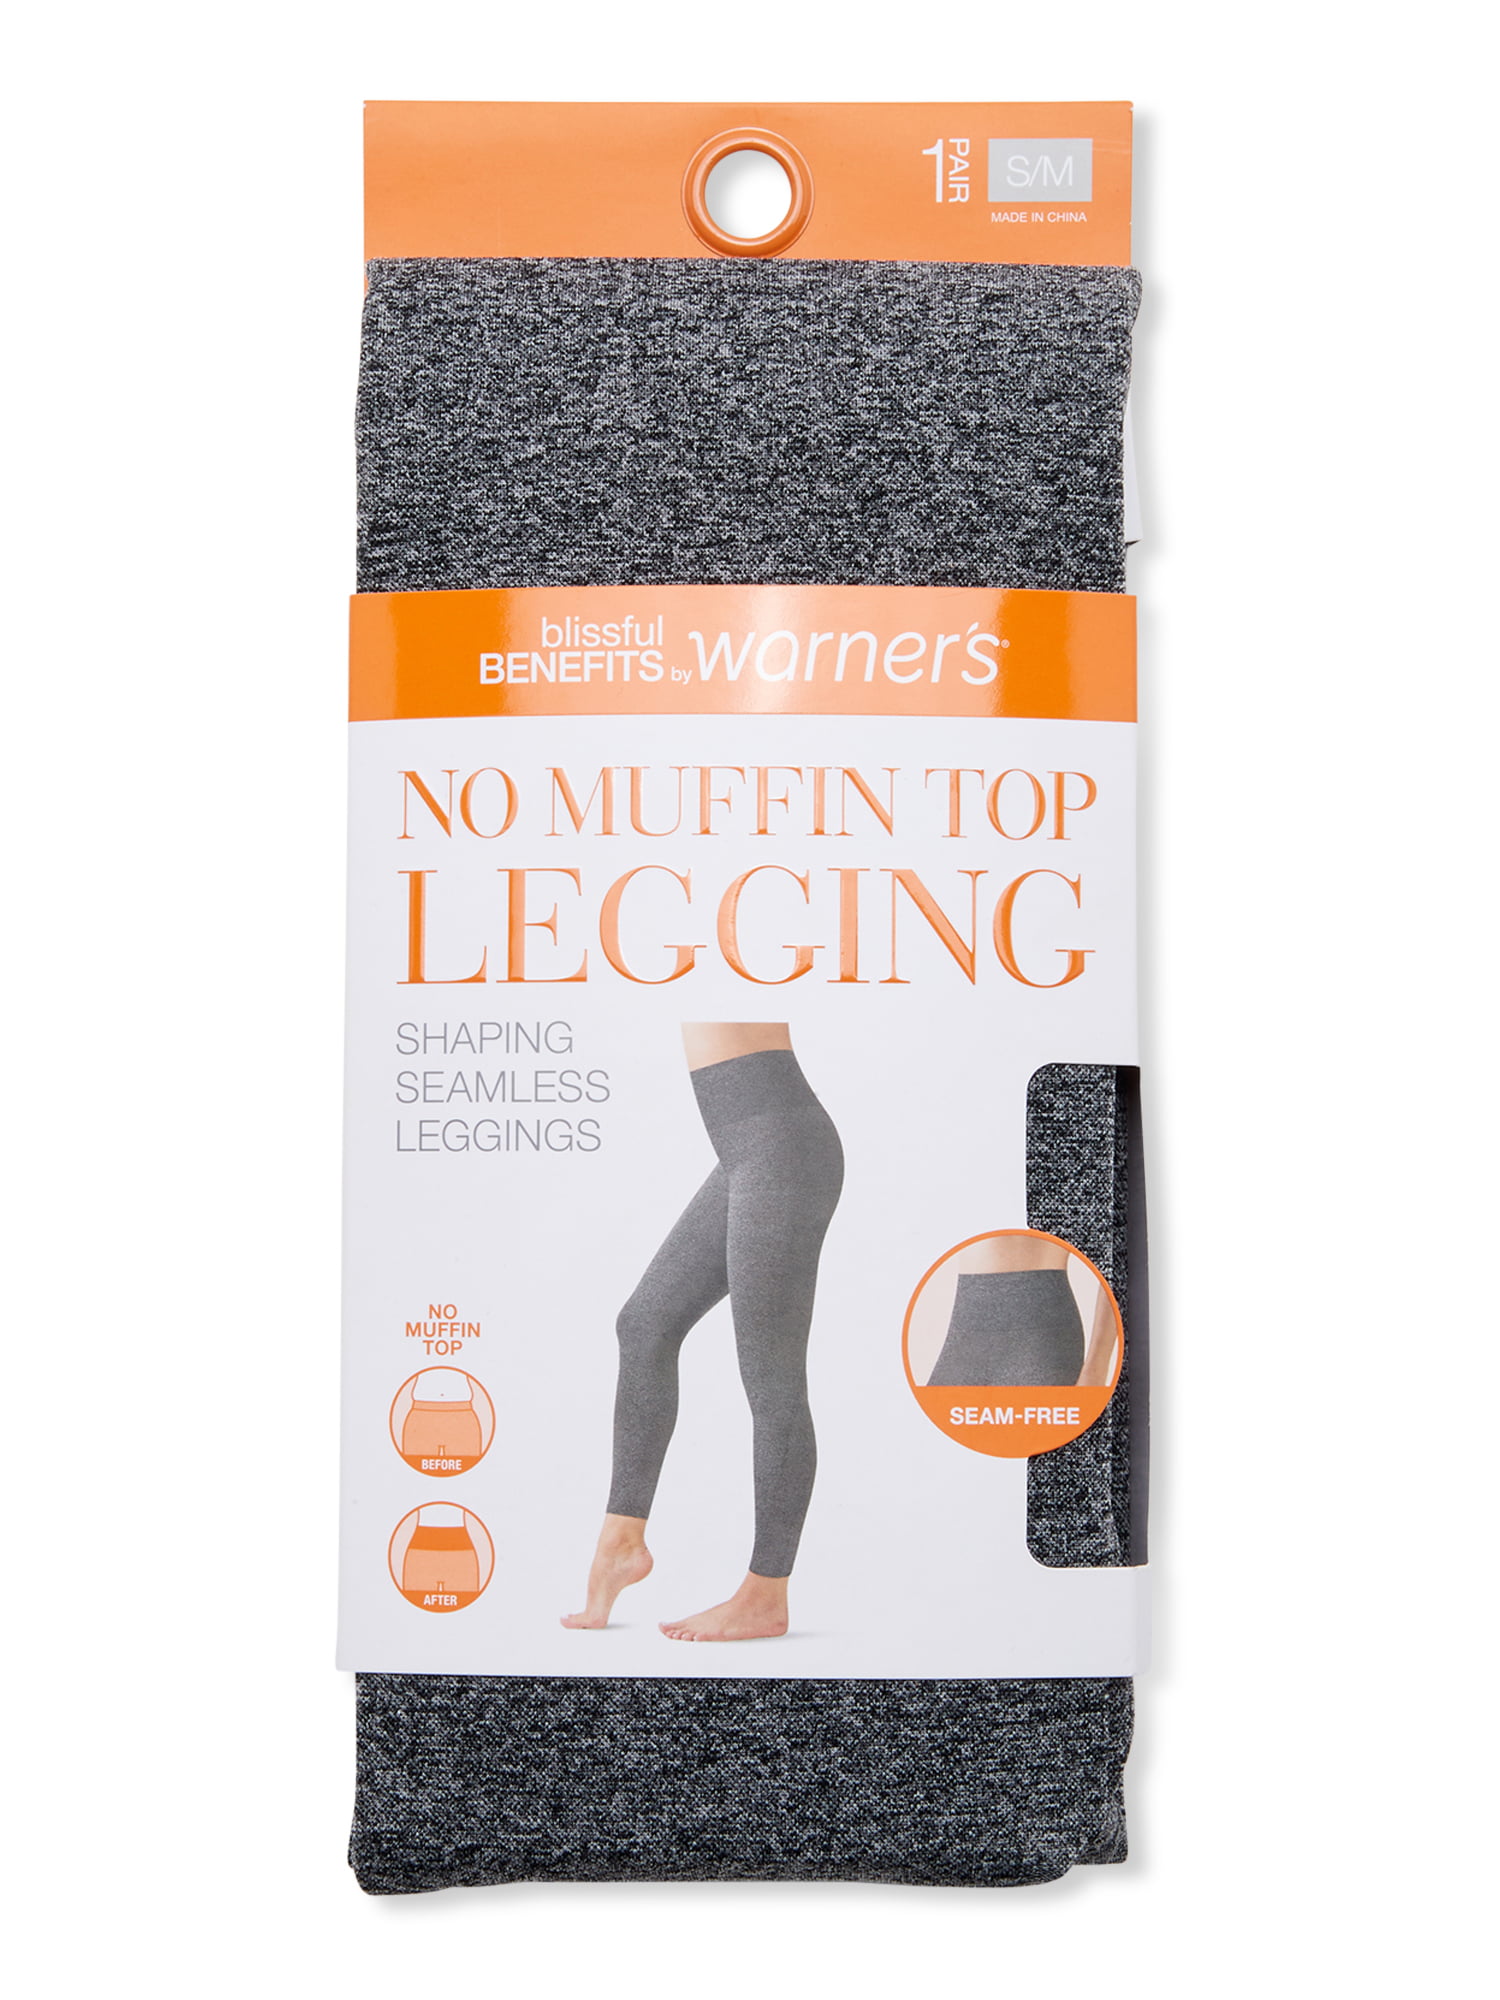 Nomuffintopleggings Are Back And Revamped! Check Them Out!, 57% OFF